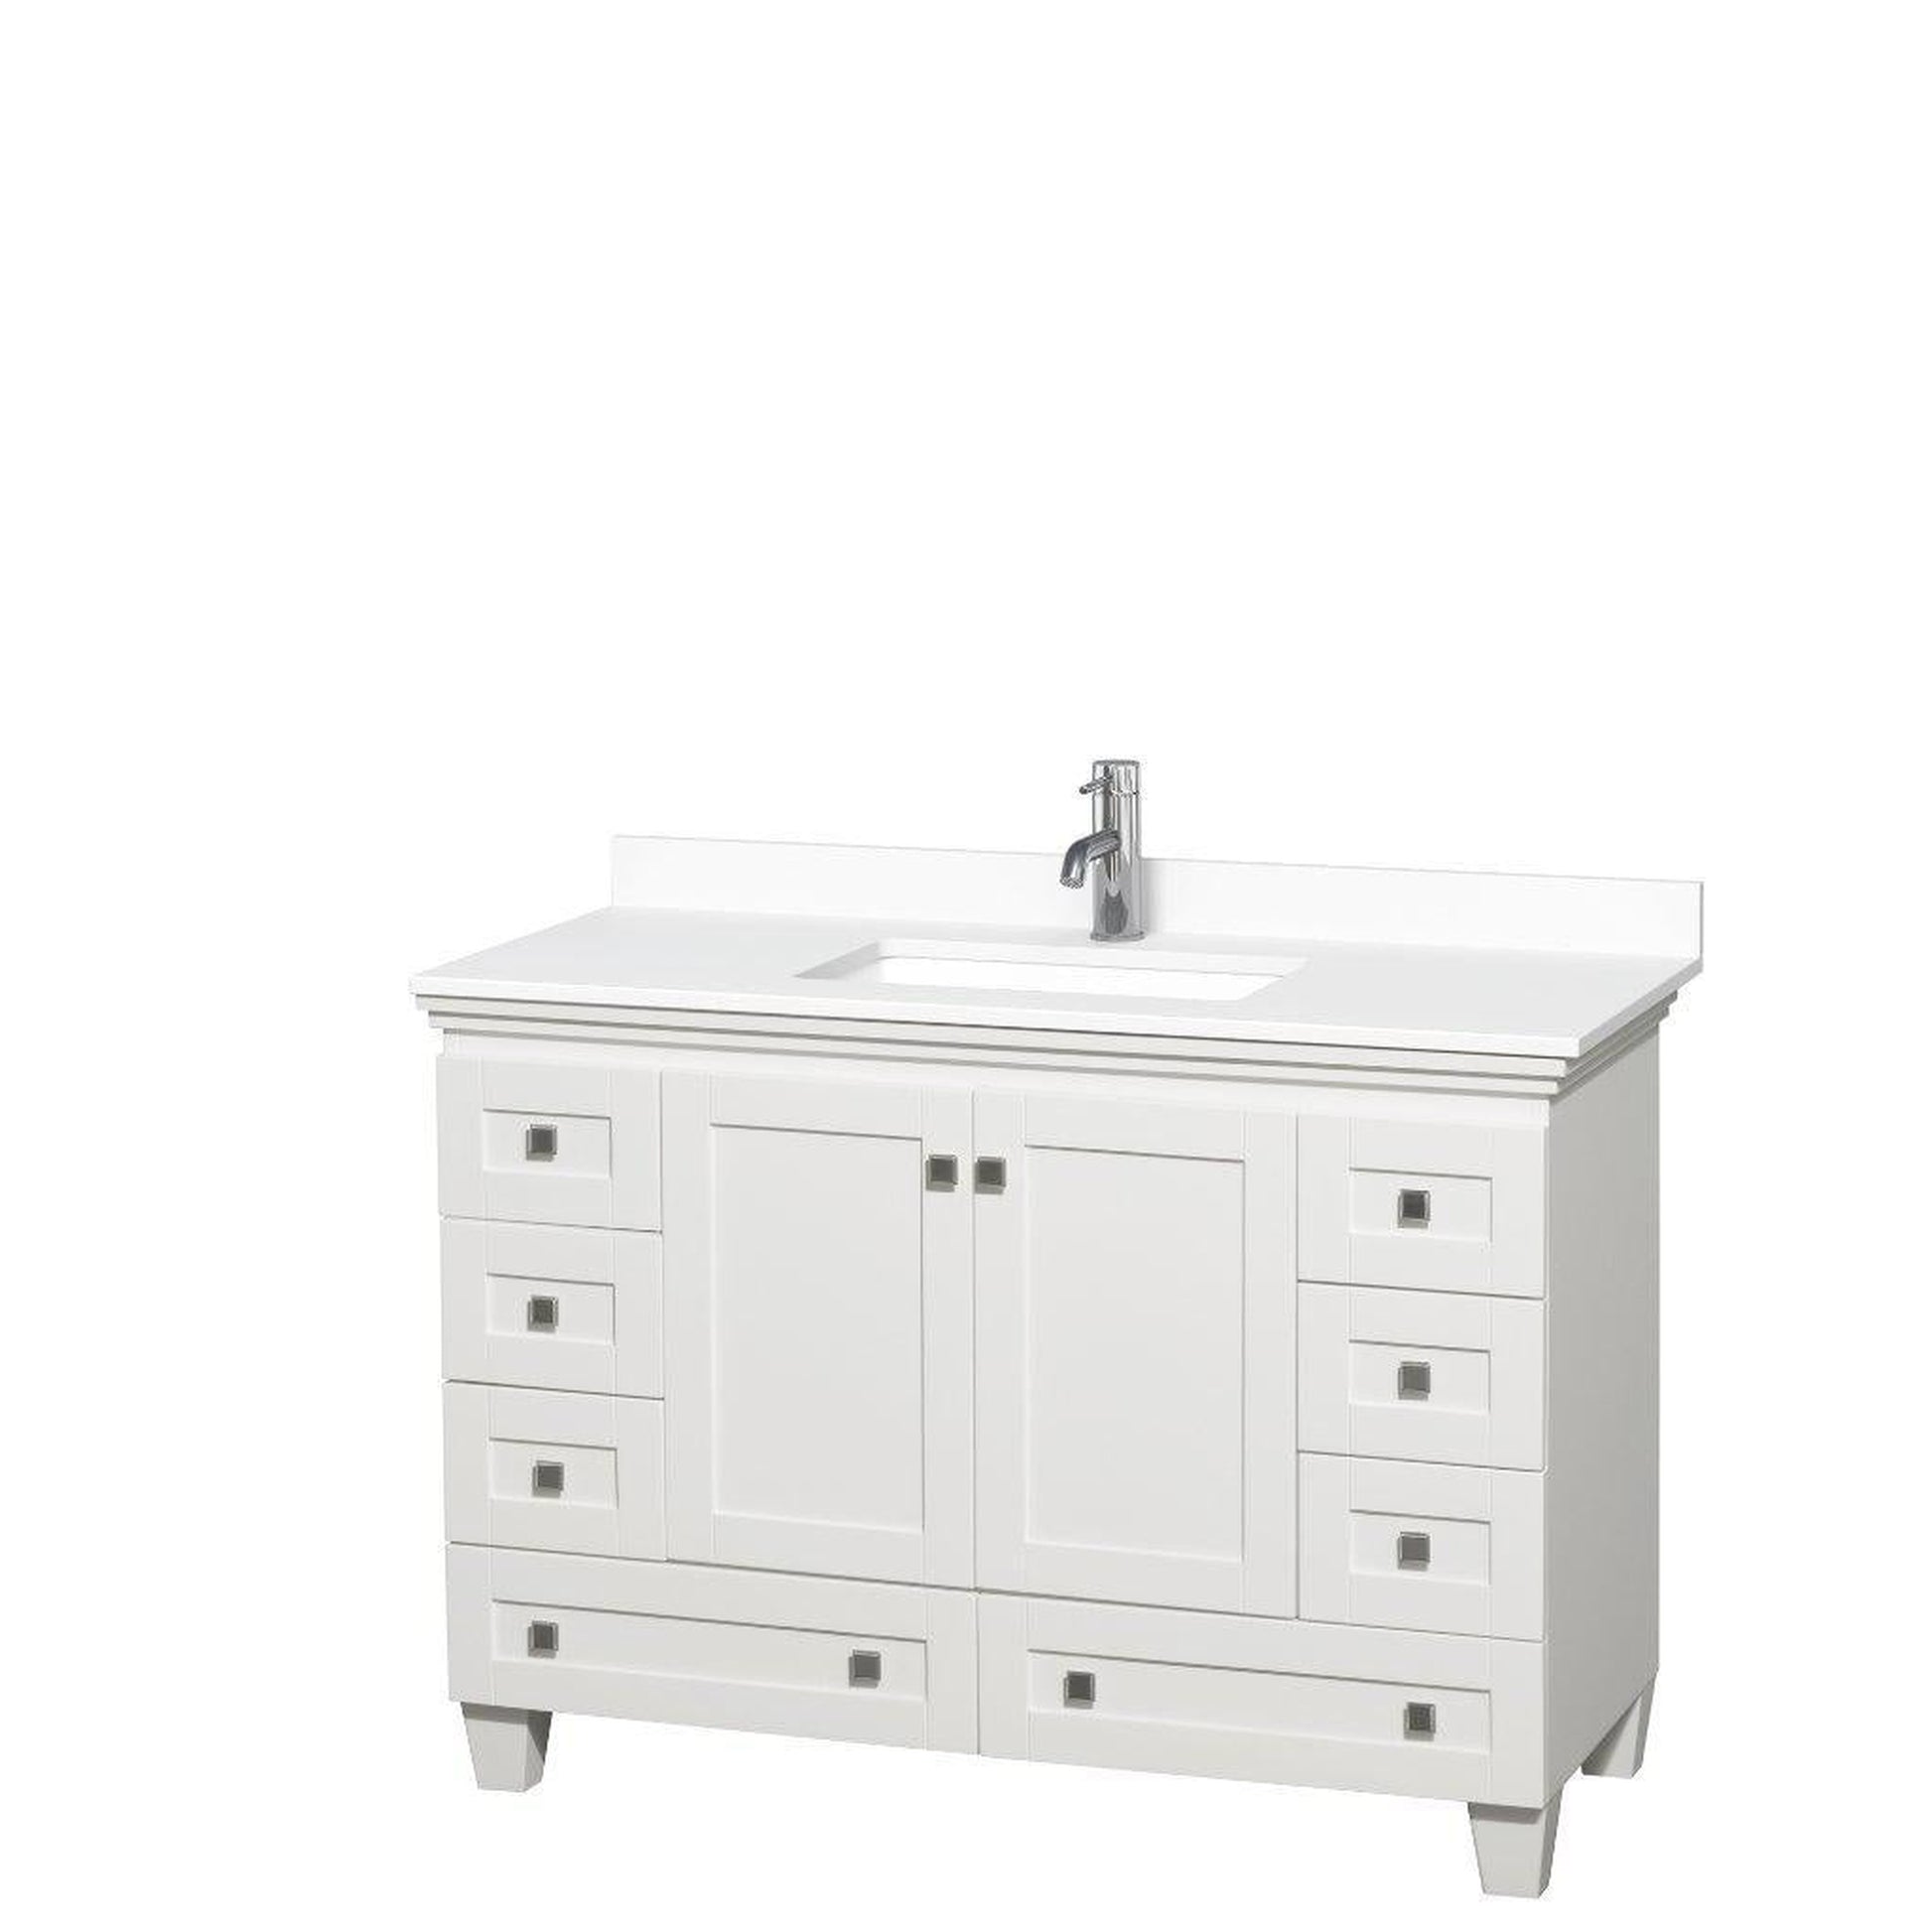 Wyndham Collection Acclaim 48" Single Bathroom White Vanity With White Cultured Marble Countertop And Undermount Square Sink